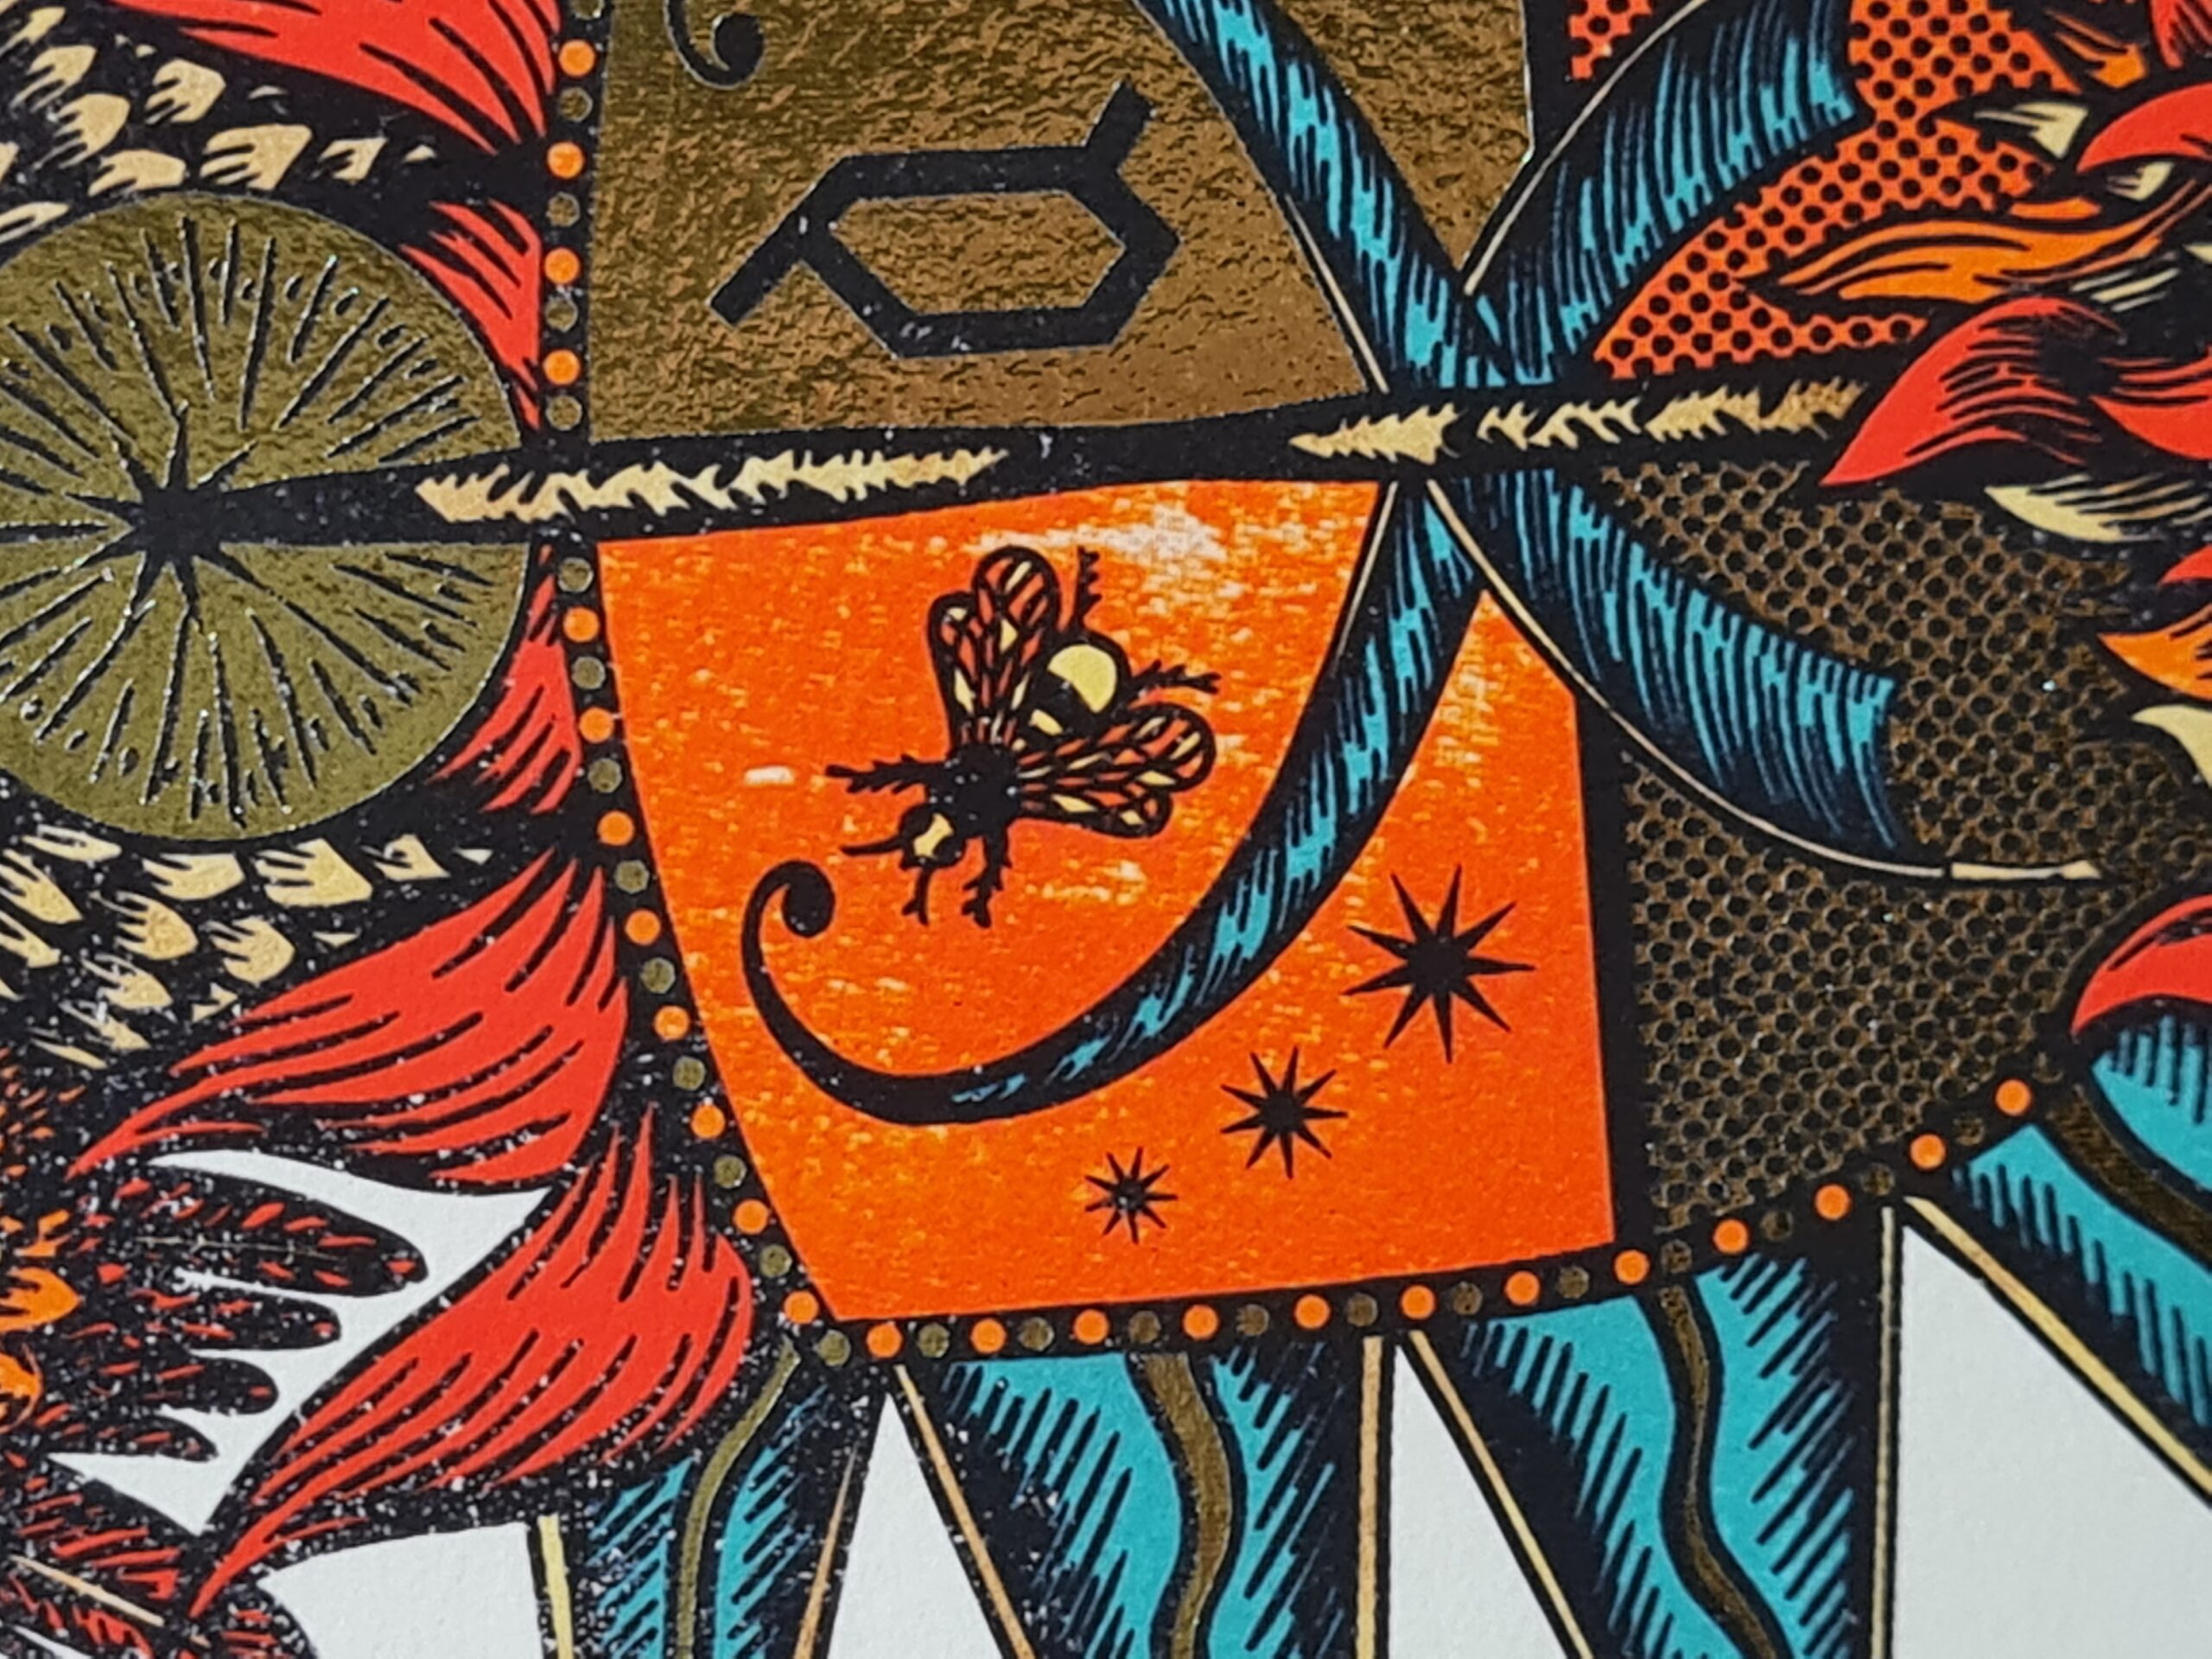 Bumblebee detail on Dumbledore insignia designed by MinaLima.